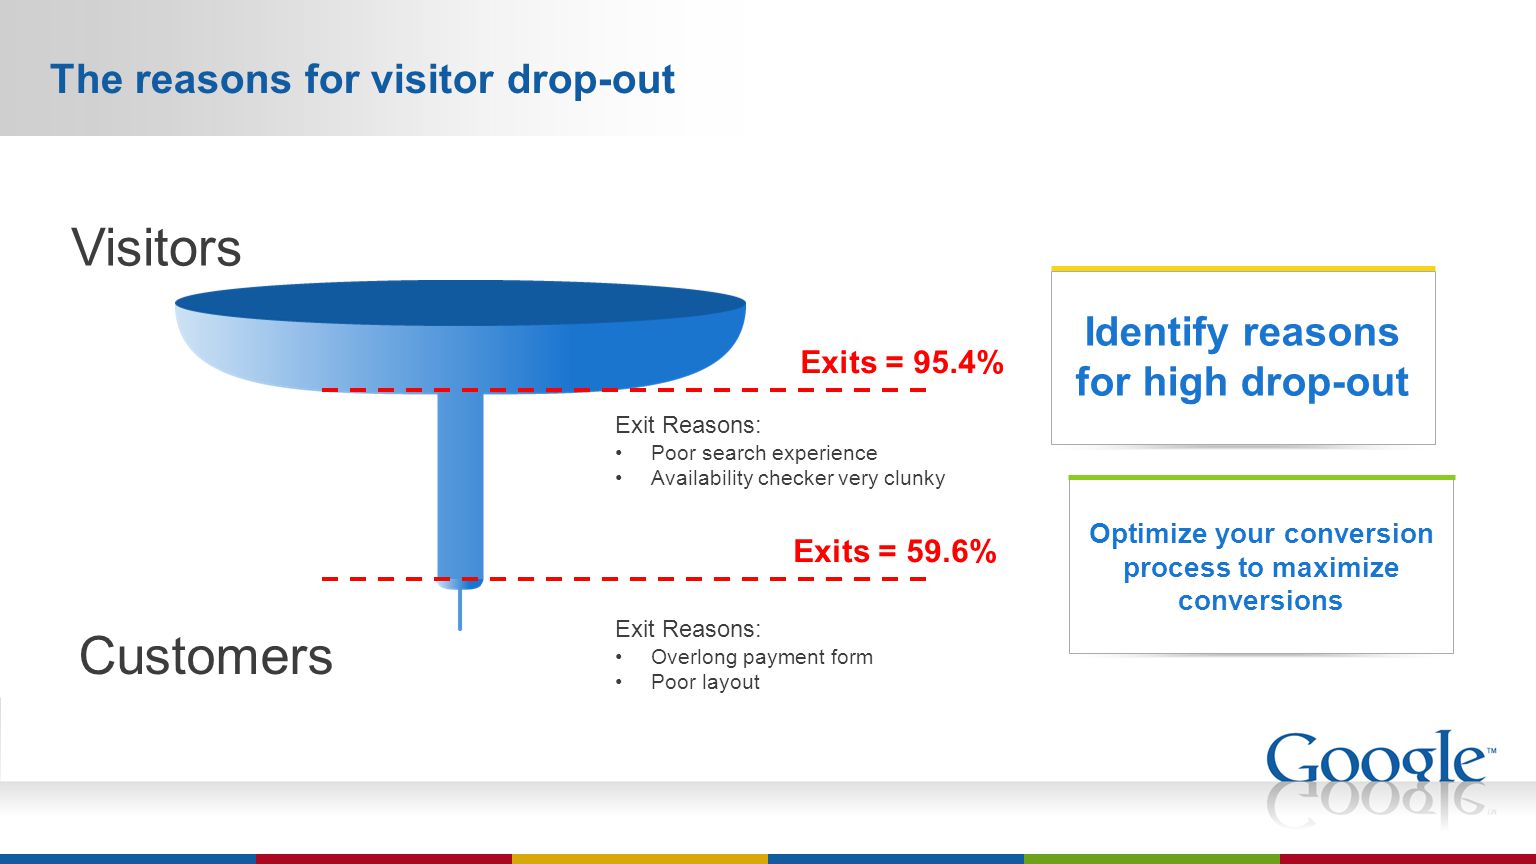 The reasons for visitor drop-out Optimize your conversion process to maximize conversions Identify reasons for high drop-out Exits = 95.4% Exits = 59.6% Exit Reasons: Overlong payment form Poor layout Exit Reasons: Poor search experience Availability checker very clunky Visitors Customers